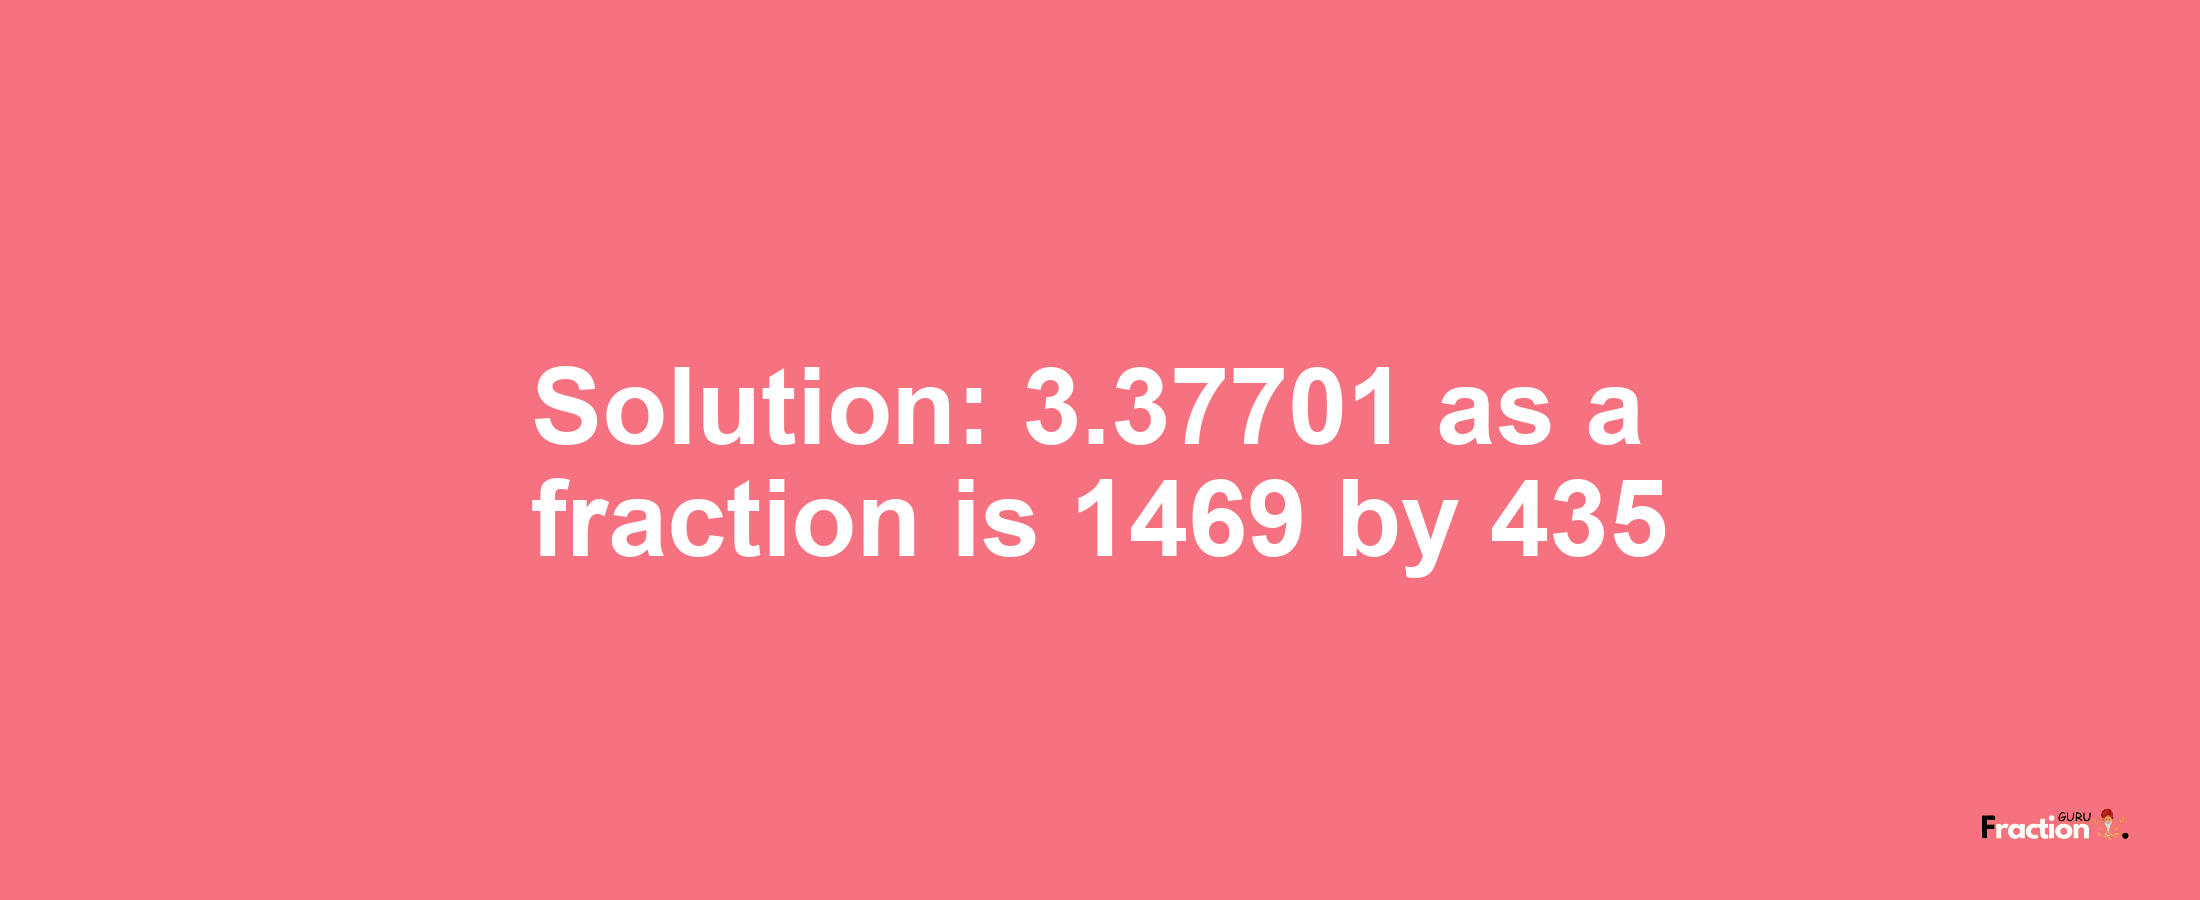 Solution:3.37701 as a fraction is 1469/435